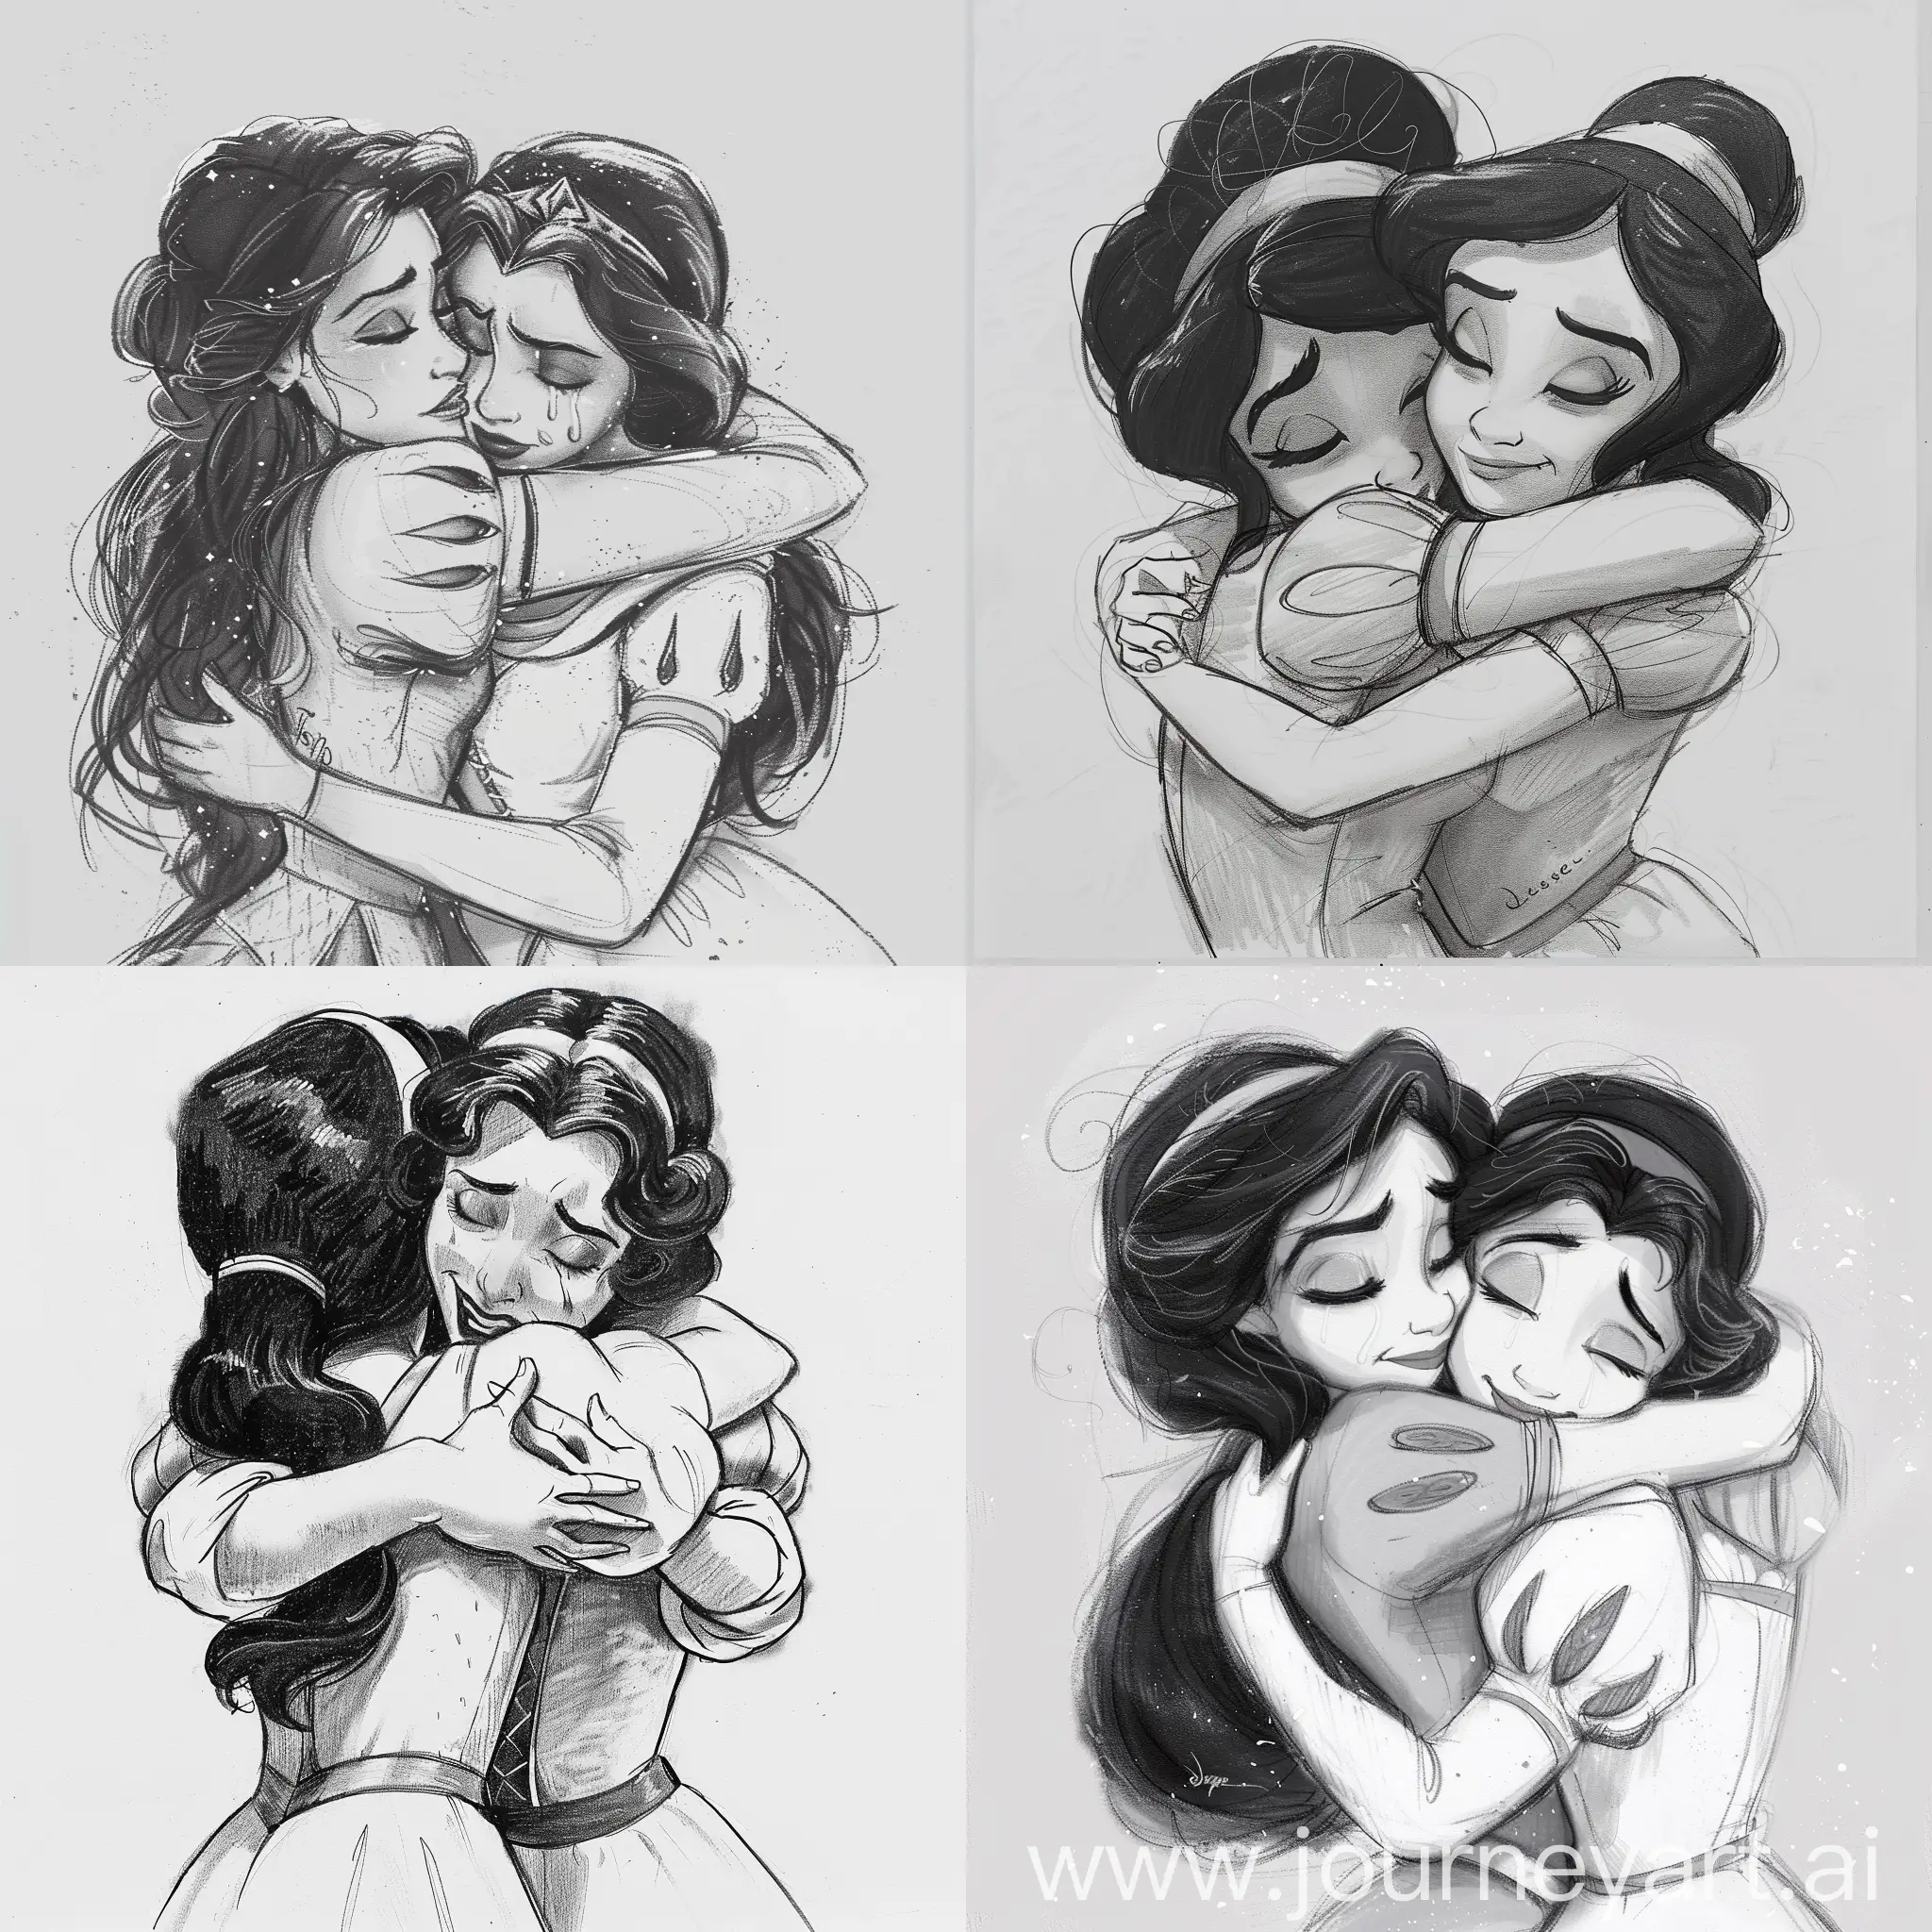 Disney-Princesses-Jasmine-and-Snow-White-in-a-Comforting-Embrace